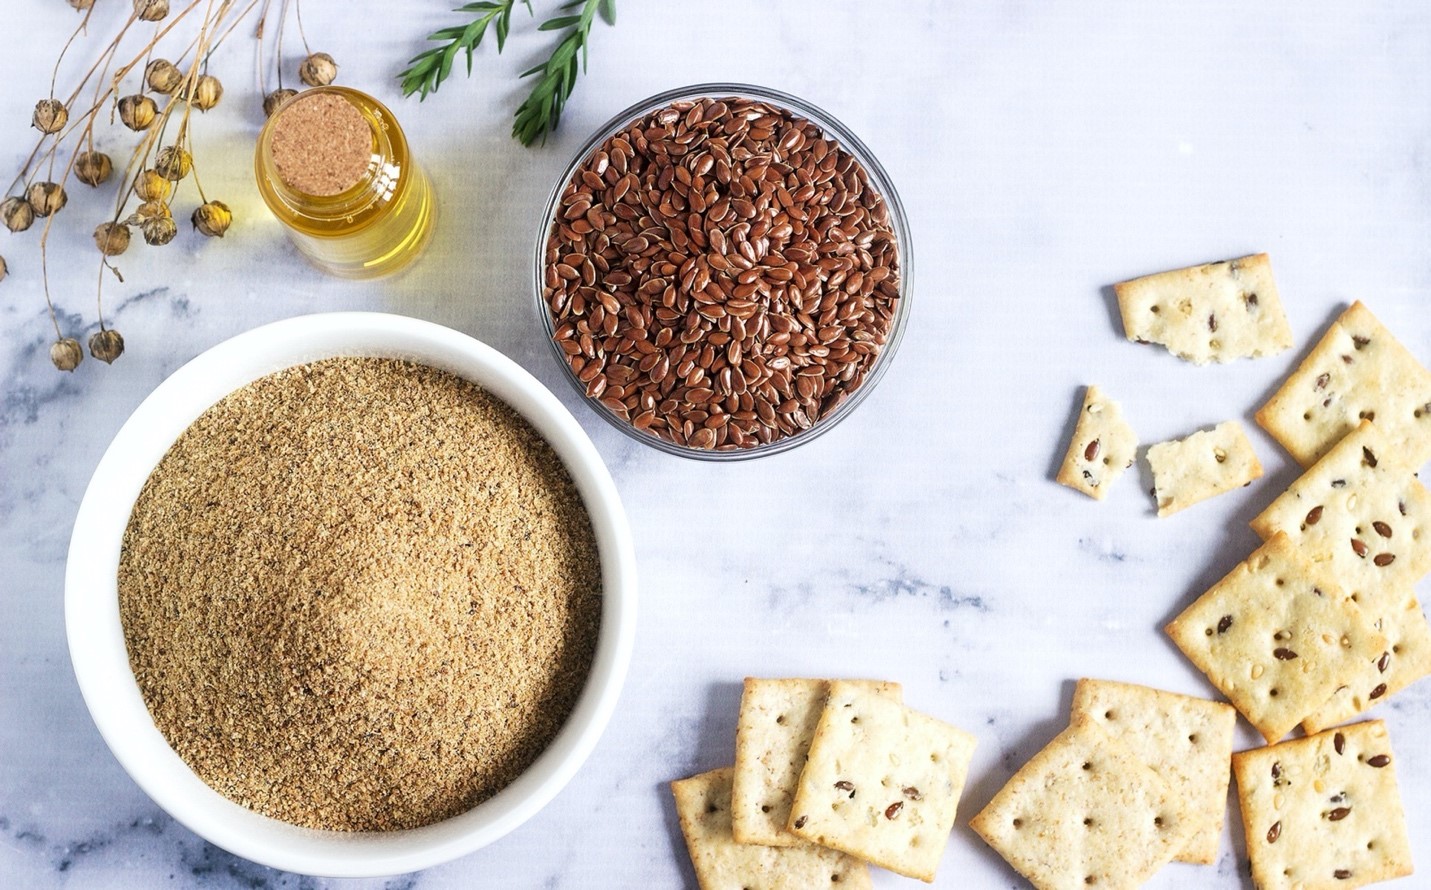 bowl of grains and crackers